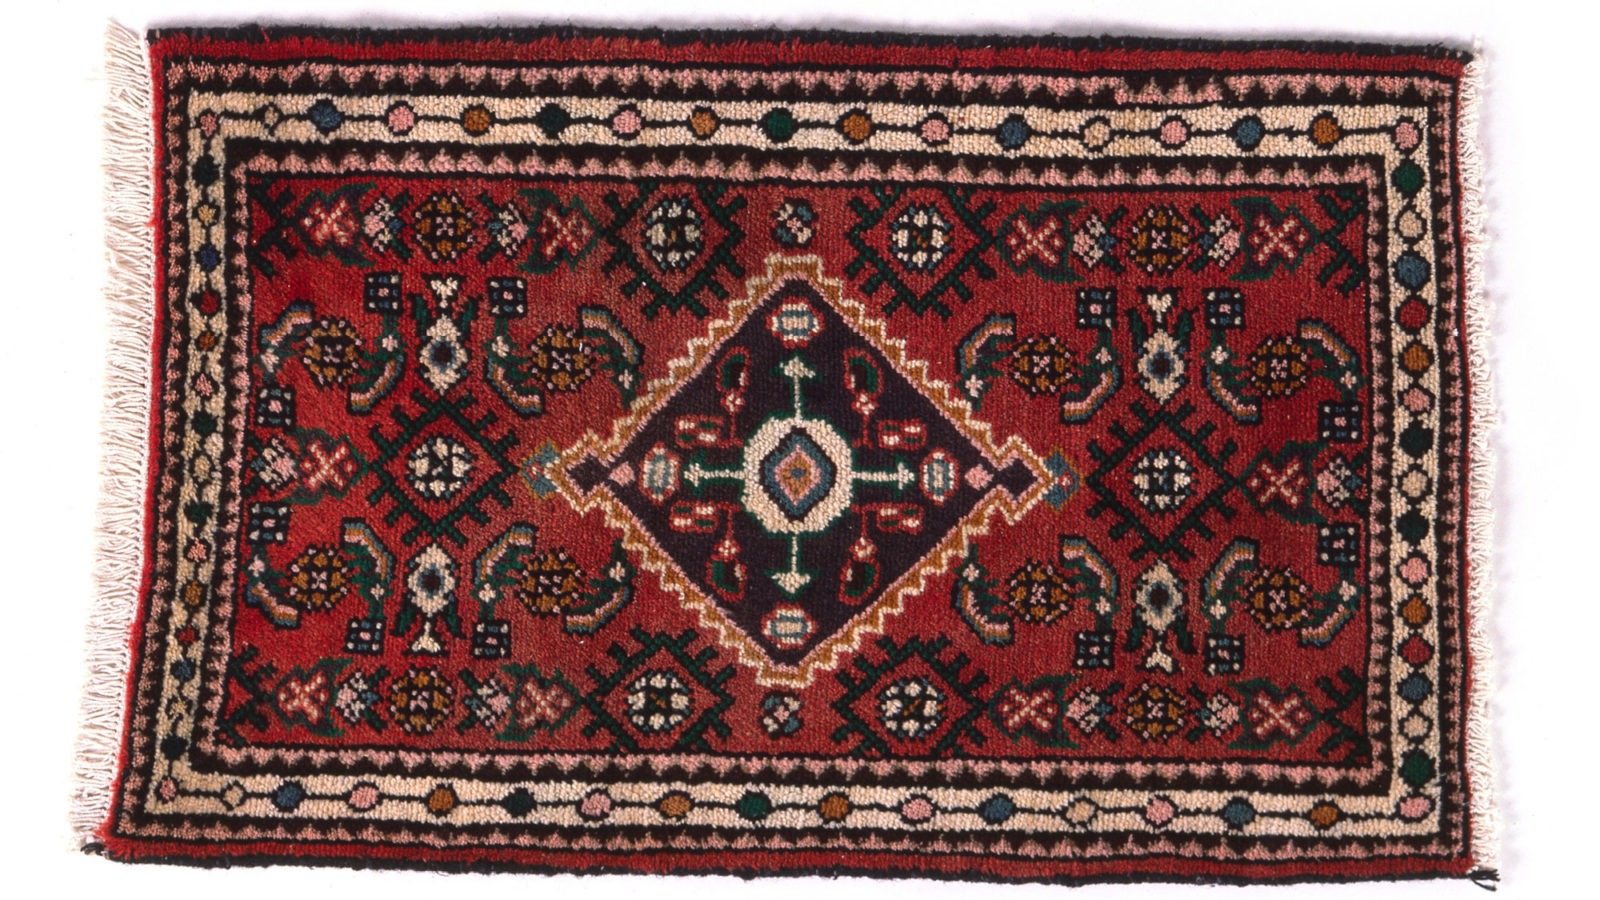 Red Wilton rug, traditional pattern with black, white, pink, blue, brown details.